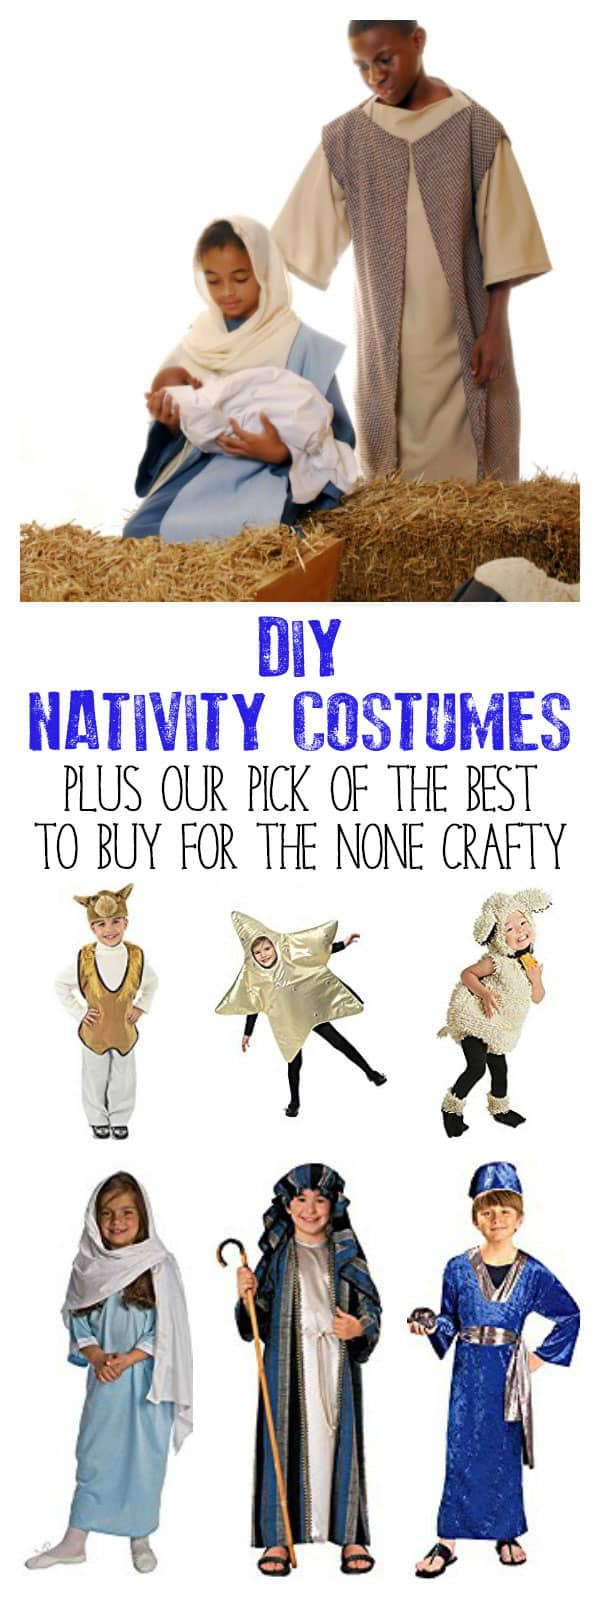 DIY Nativity Costumes
 The Best Nativity Costumes to make or for this year s